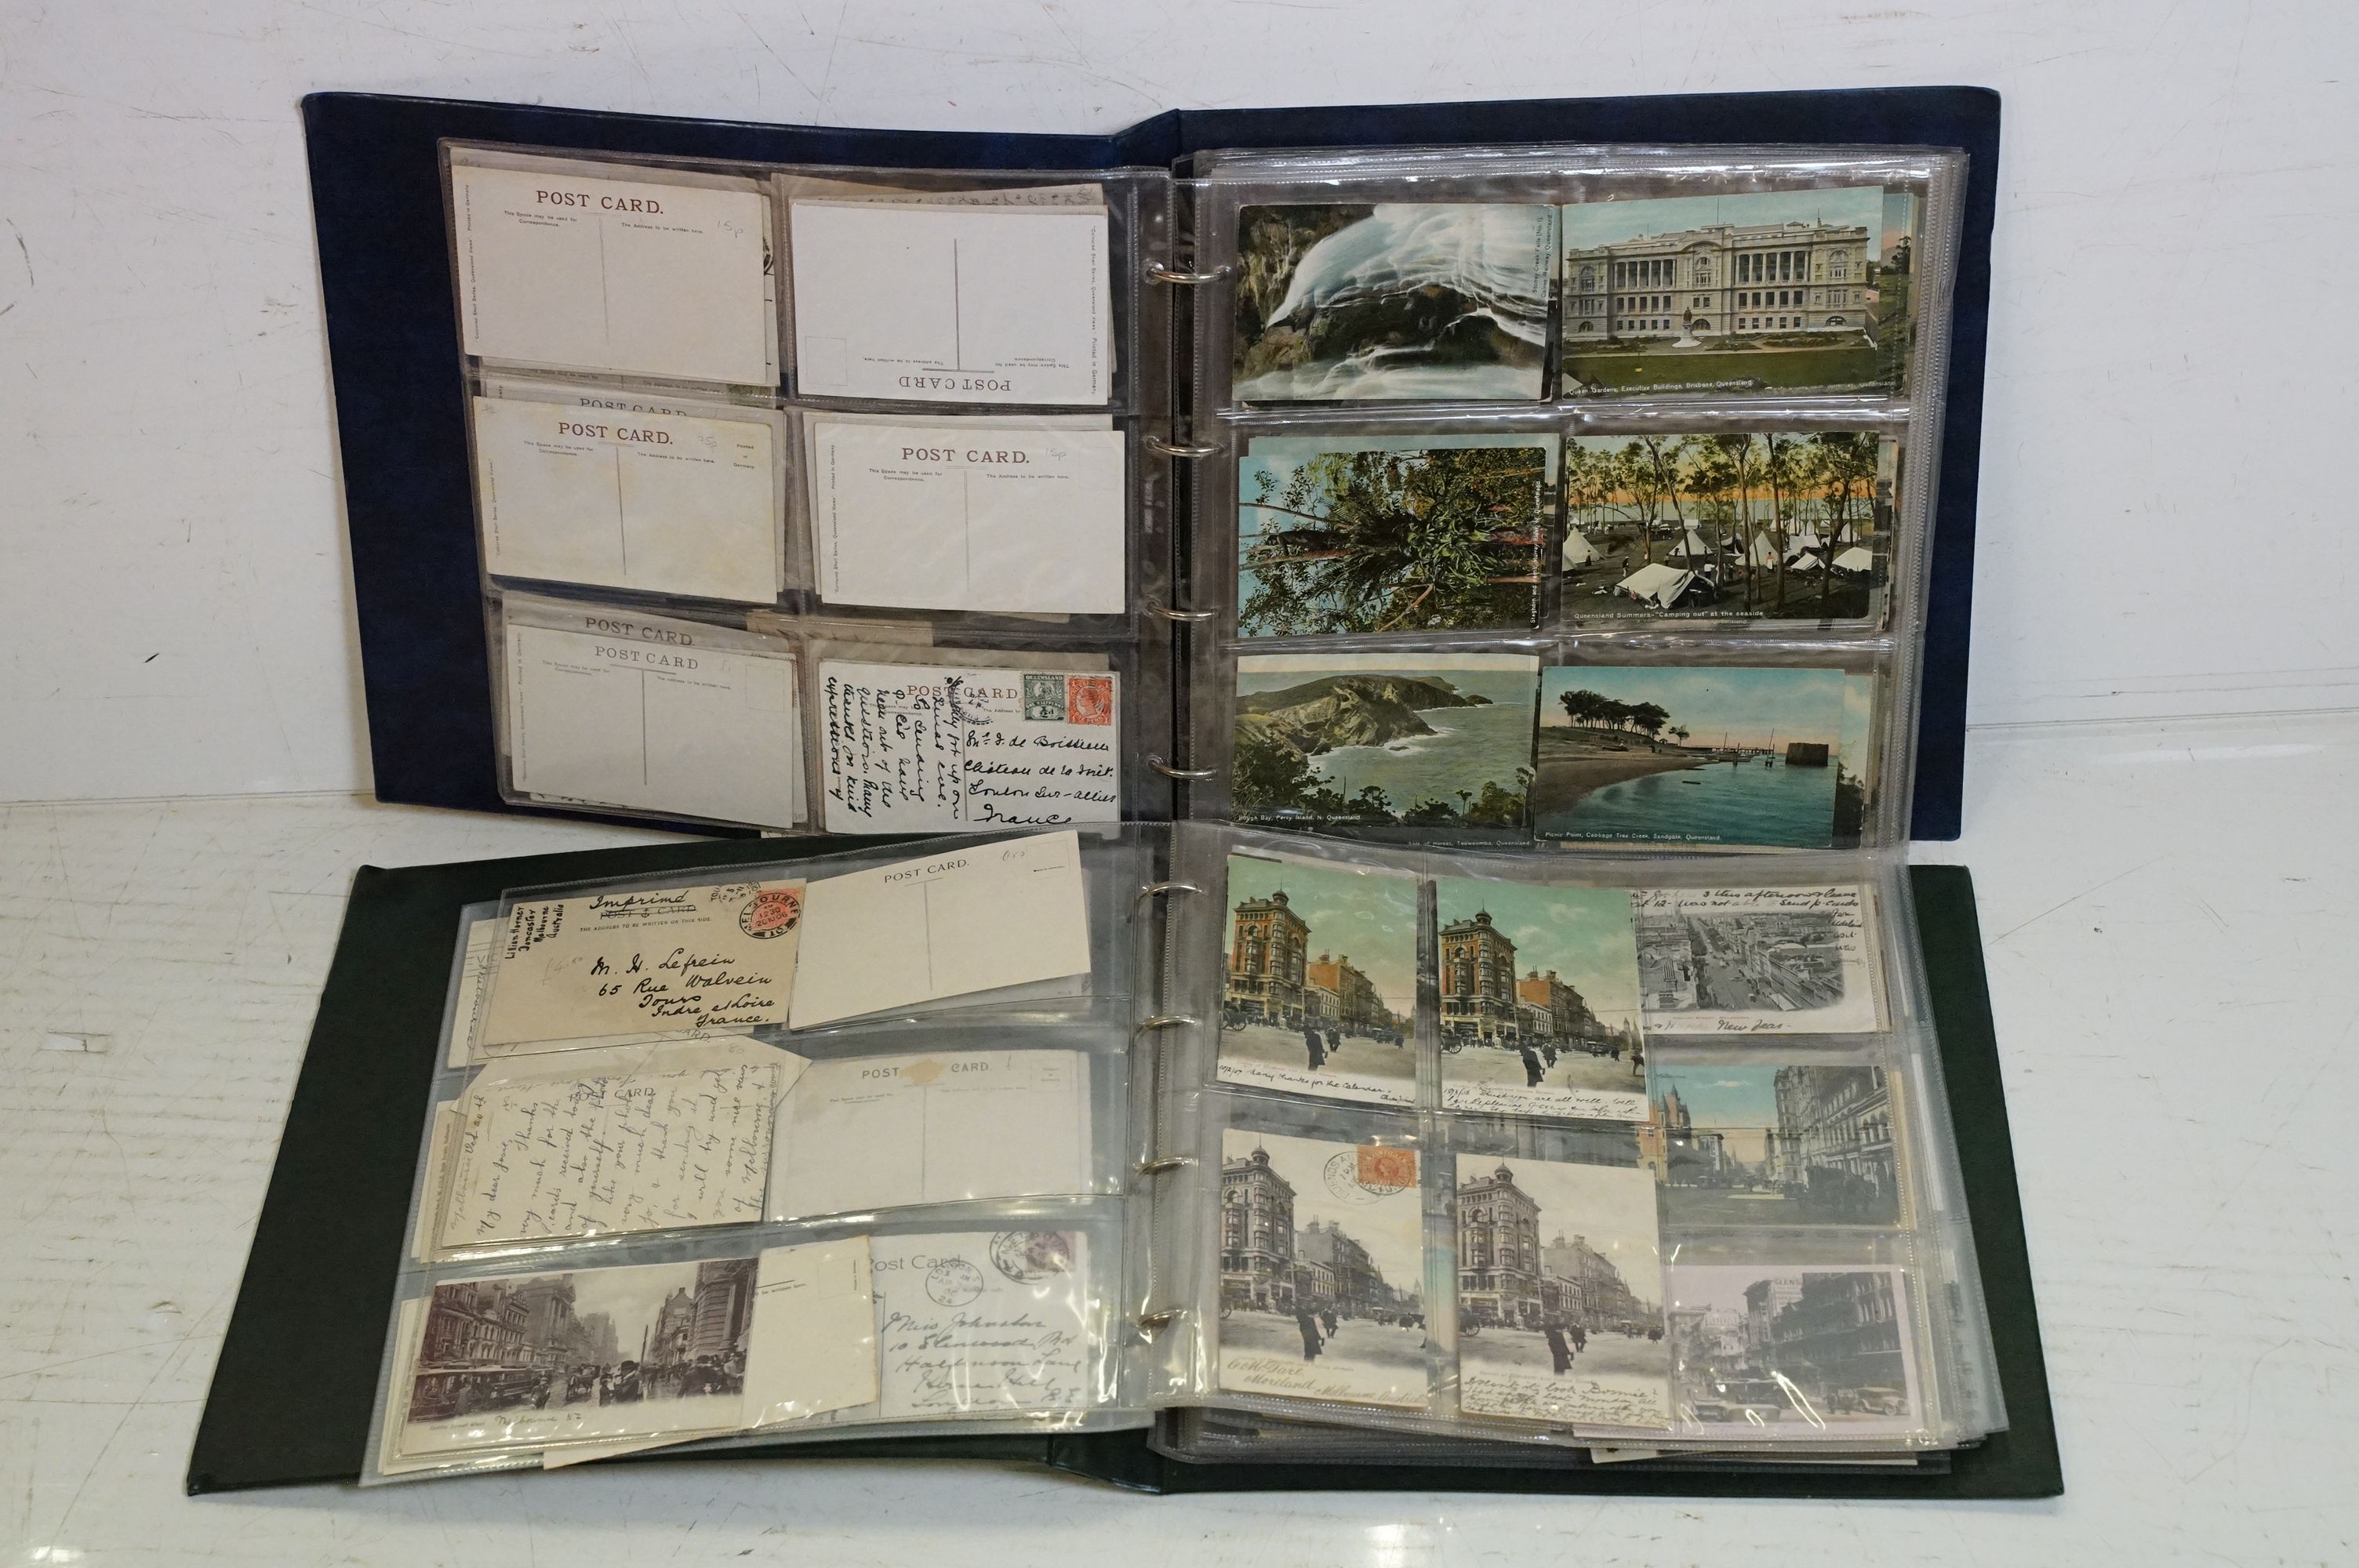 Collection of early 20th century Australian / Australian-themed postcards contained within two